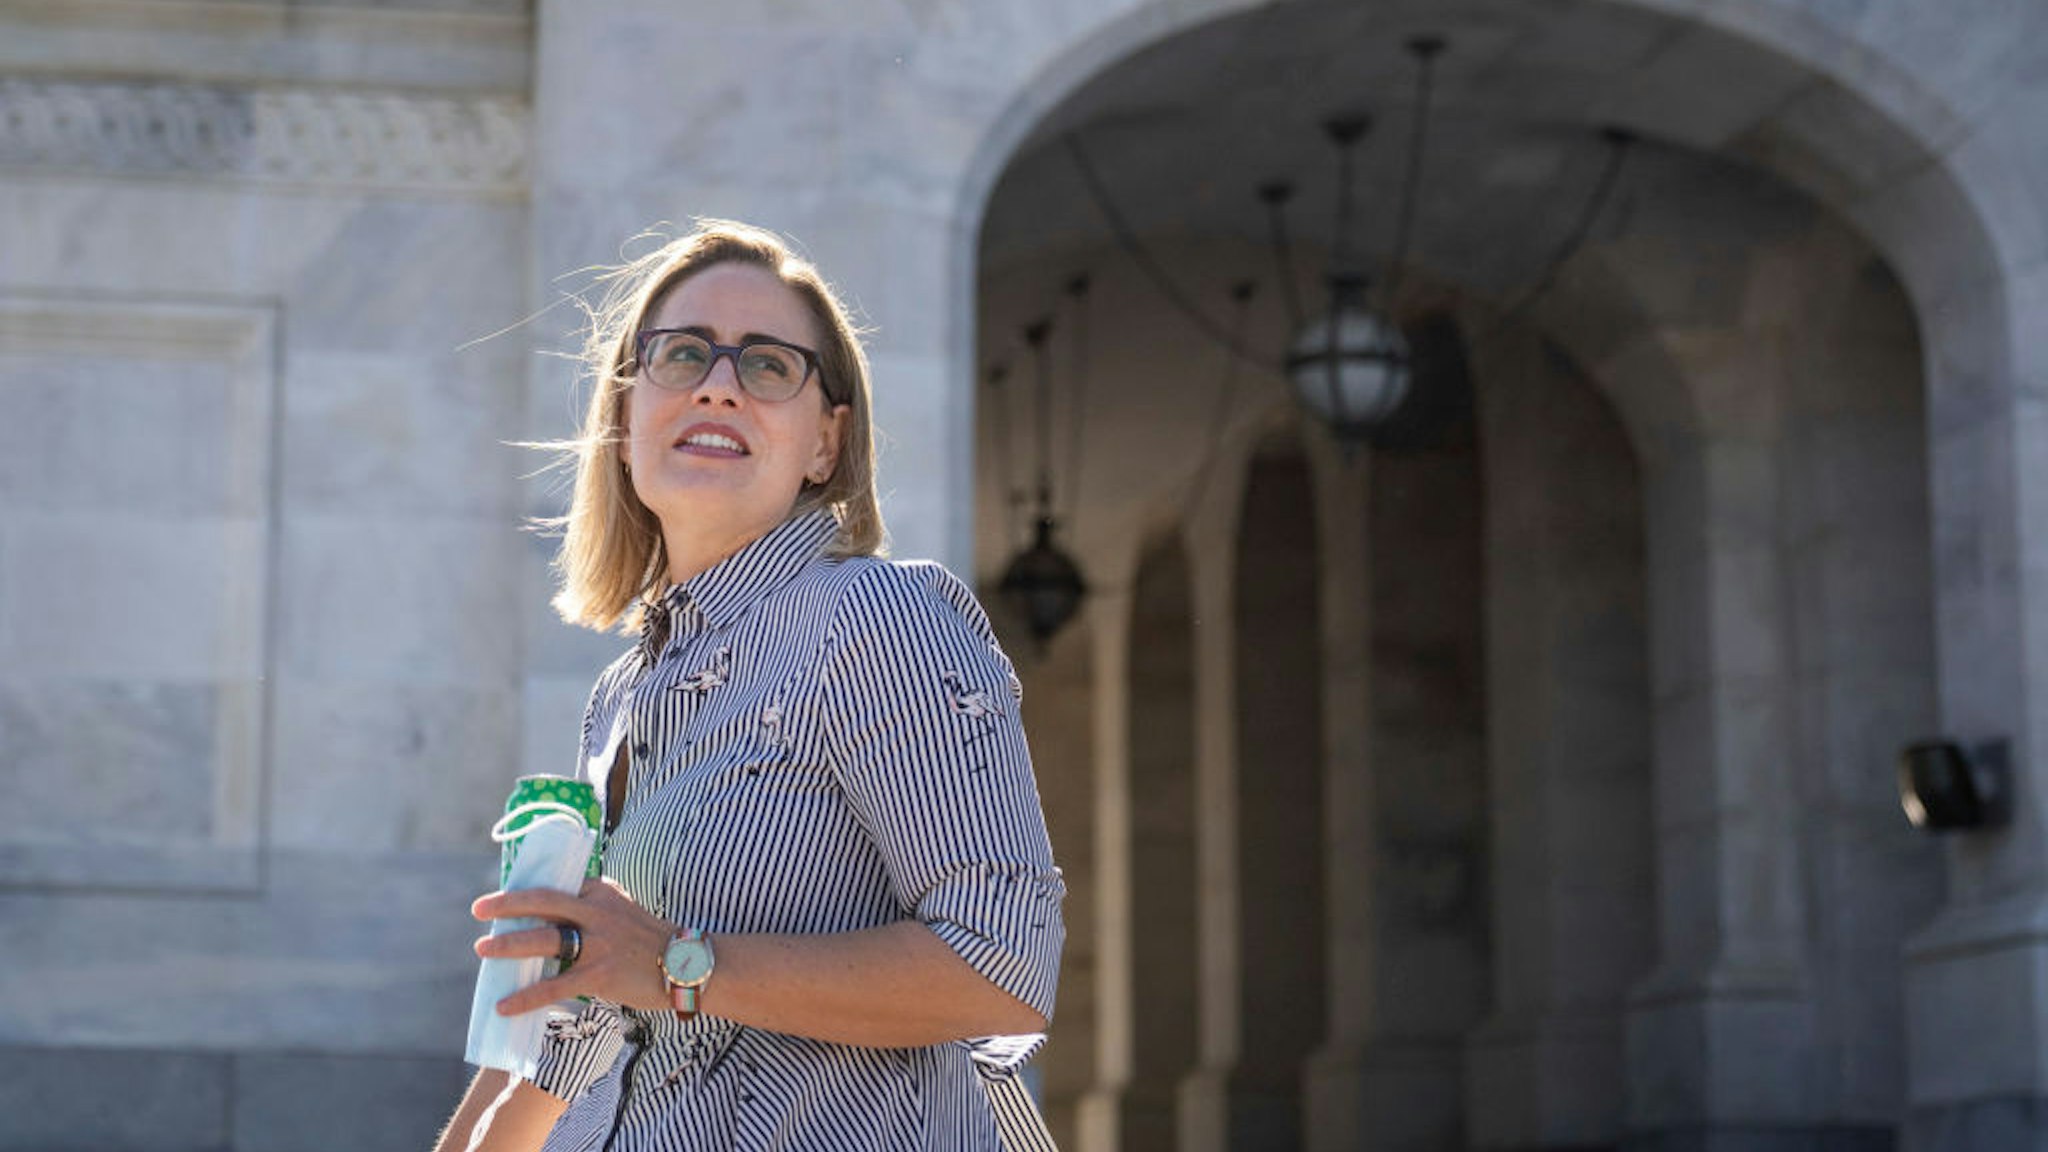 WASHINGTON, DC - OCTOBER 27: Sen. Kyrsten Sinema (D-AZ) leaves the U.S. Capitol after a private meeting and a vote October 27, 2021 in Washington, DC. Democrats are continuing internal negotiations about the Biden administration's social policy spending bill. (Photo by Drew Angerer/Getty Images)